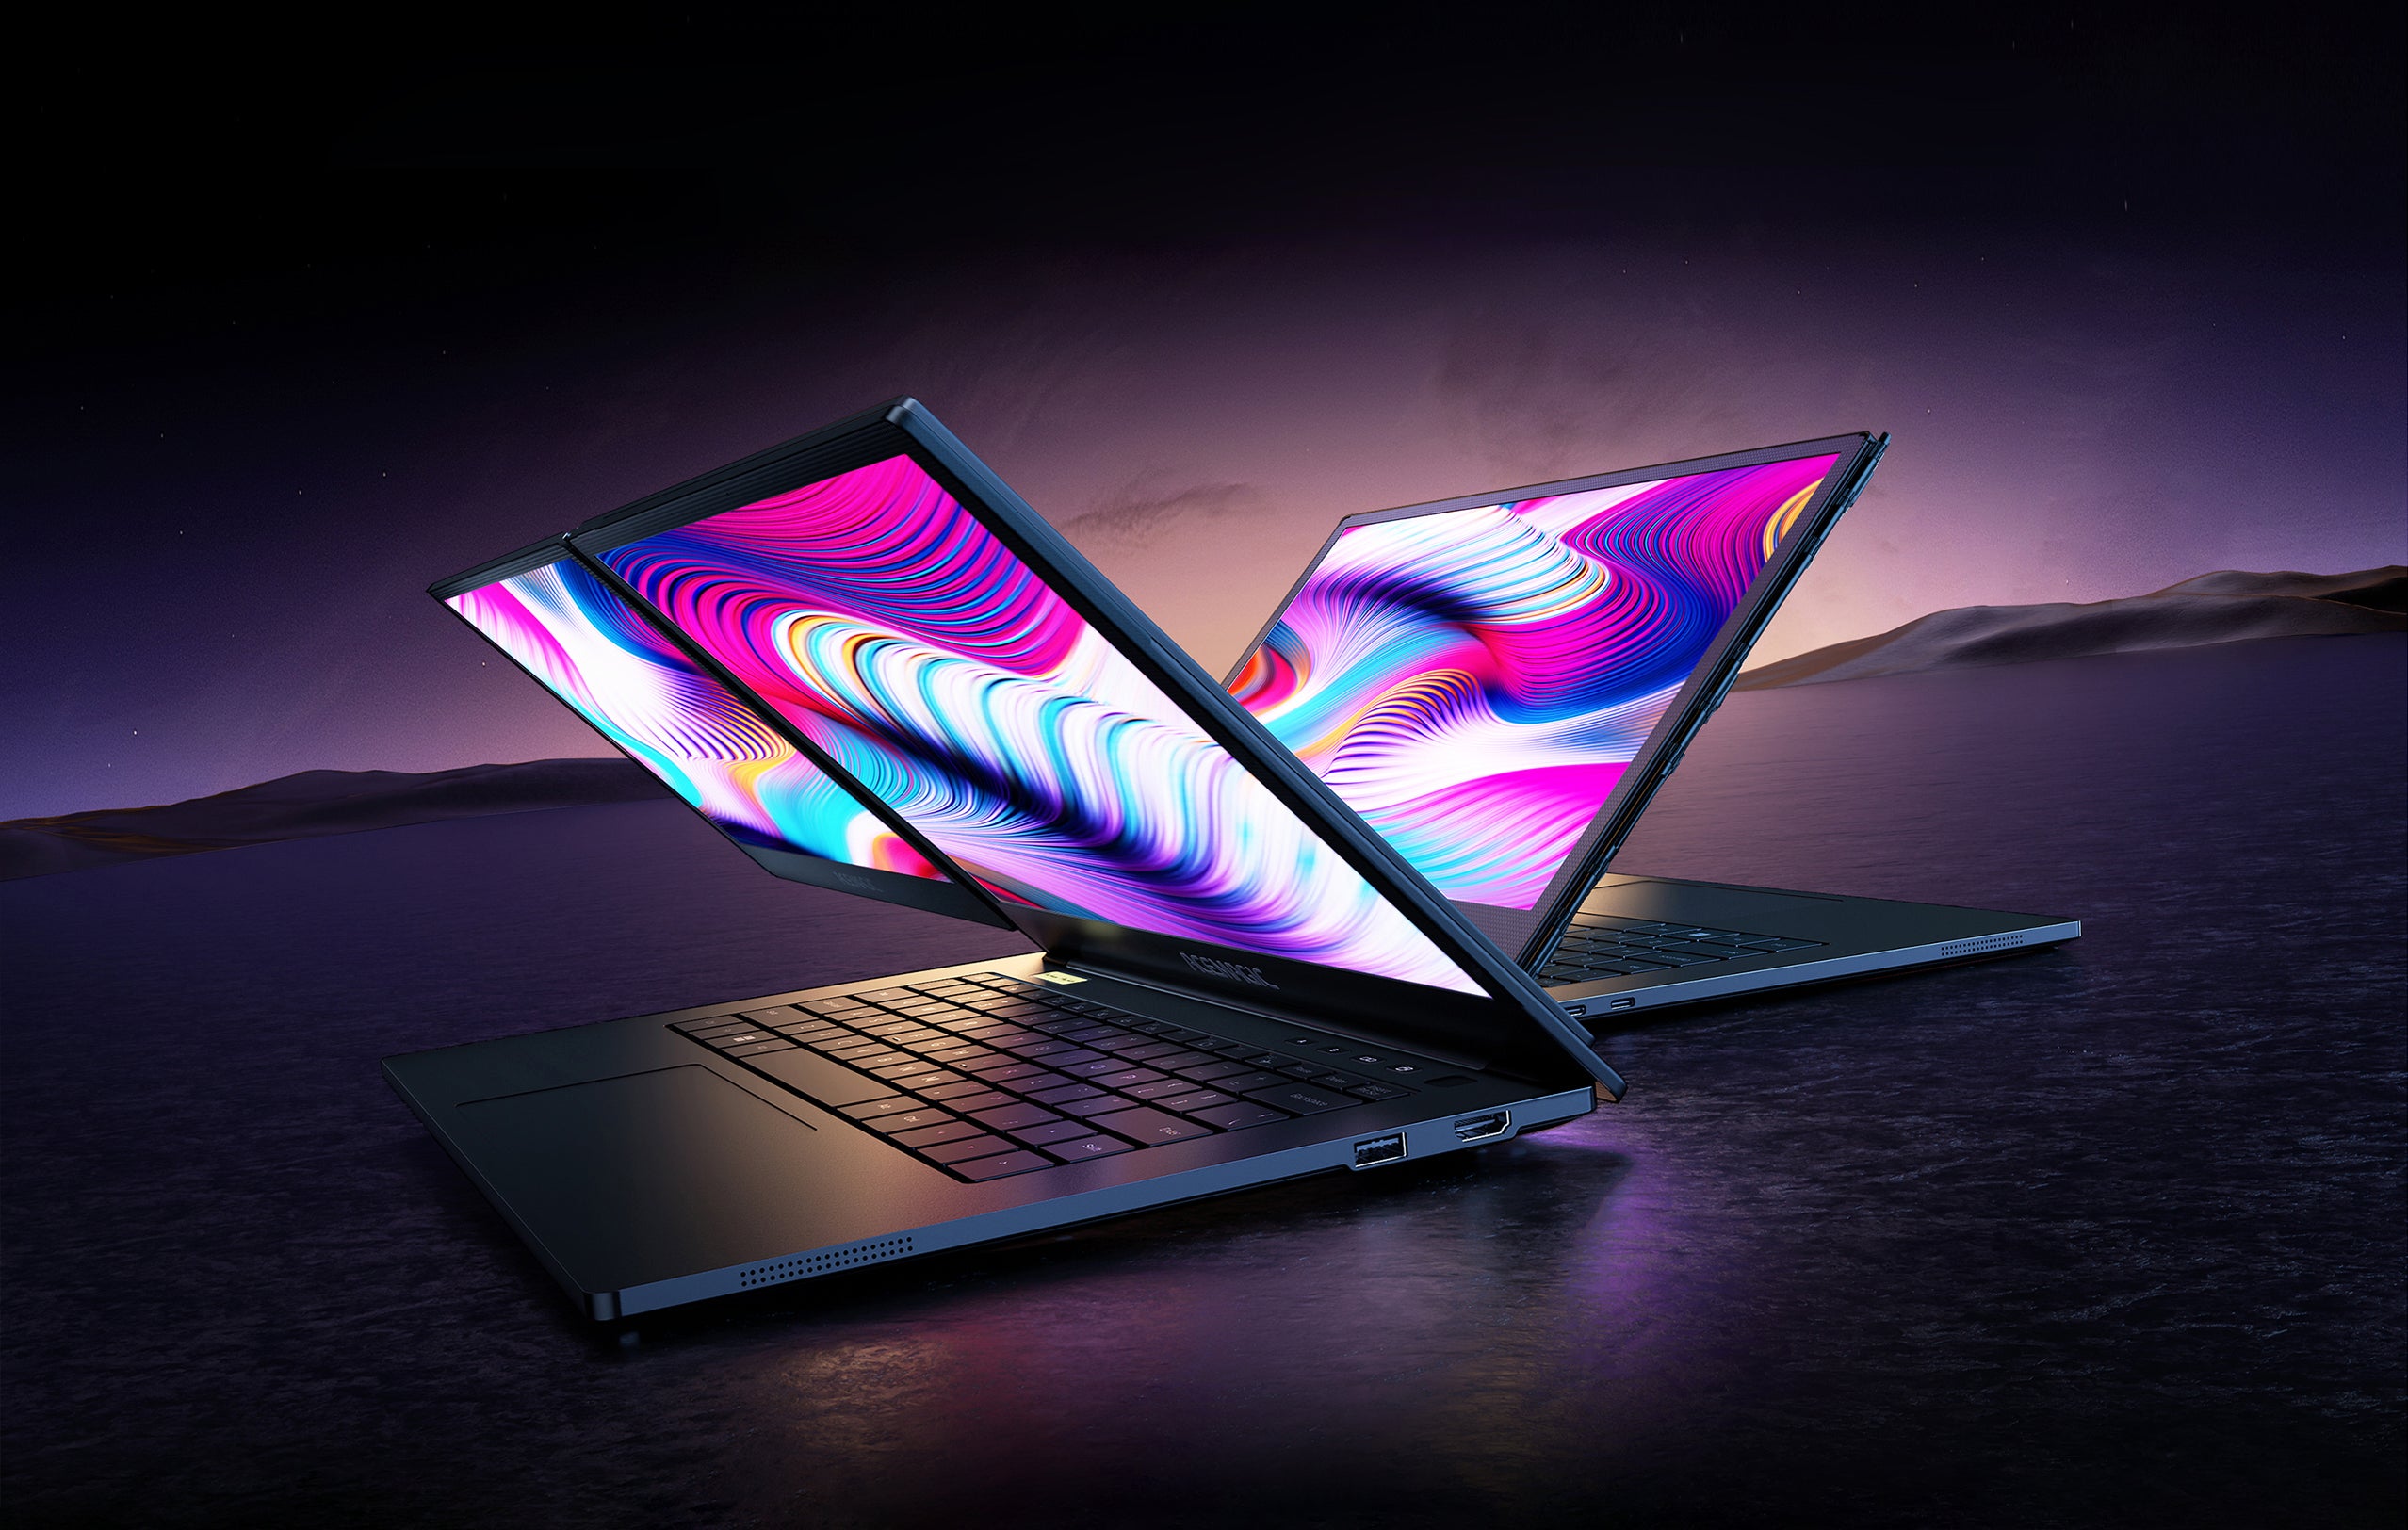 ACEMAGIC Unveils World's First 360° Dual-Screen Business Laptop: The ACEMAGIC X1